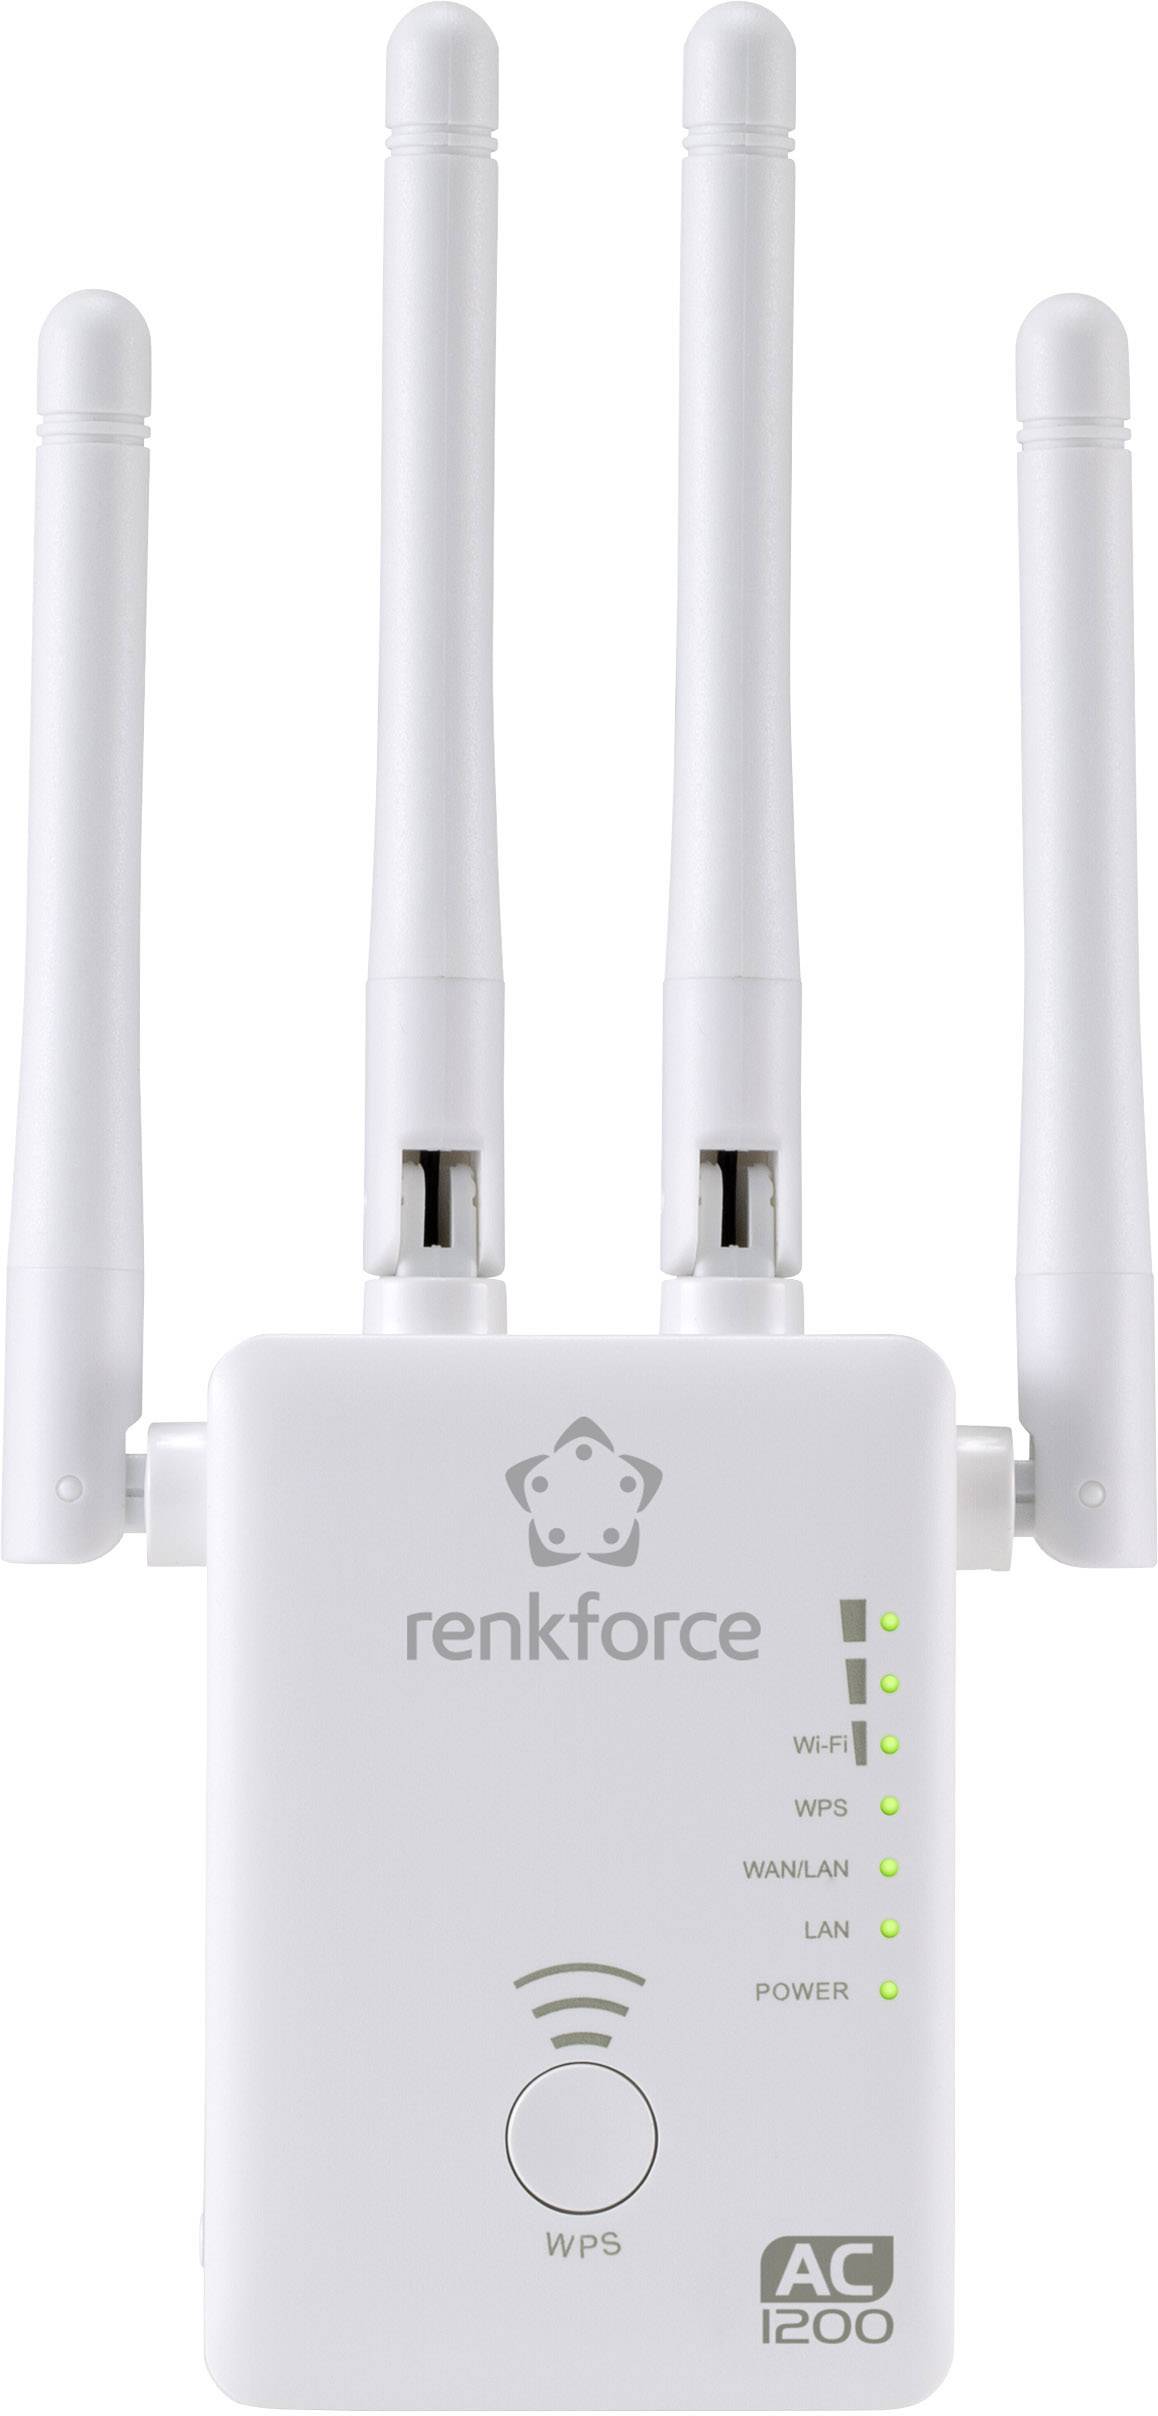 RENKFORCE WS-WN575A3 WLAN Repeater 10 / 100 MBit/s 2.4 GHz, 5 GHz